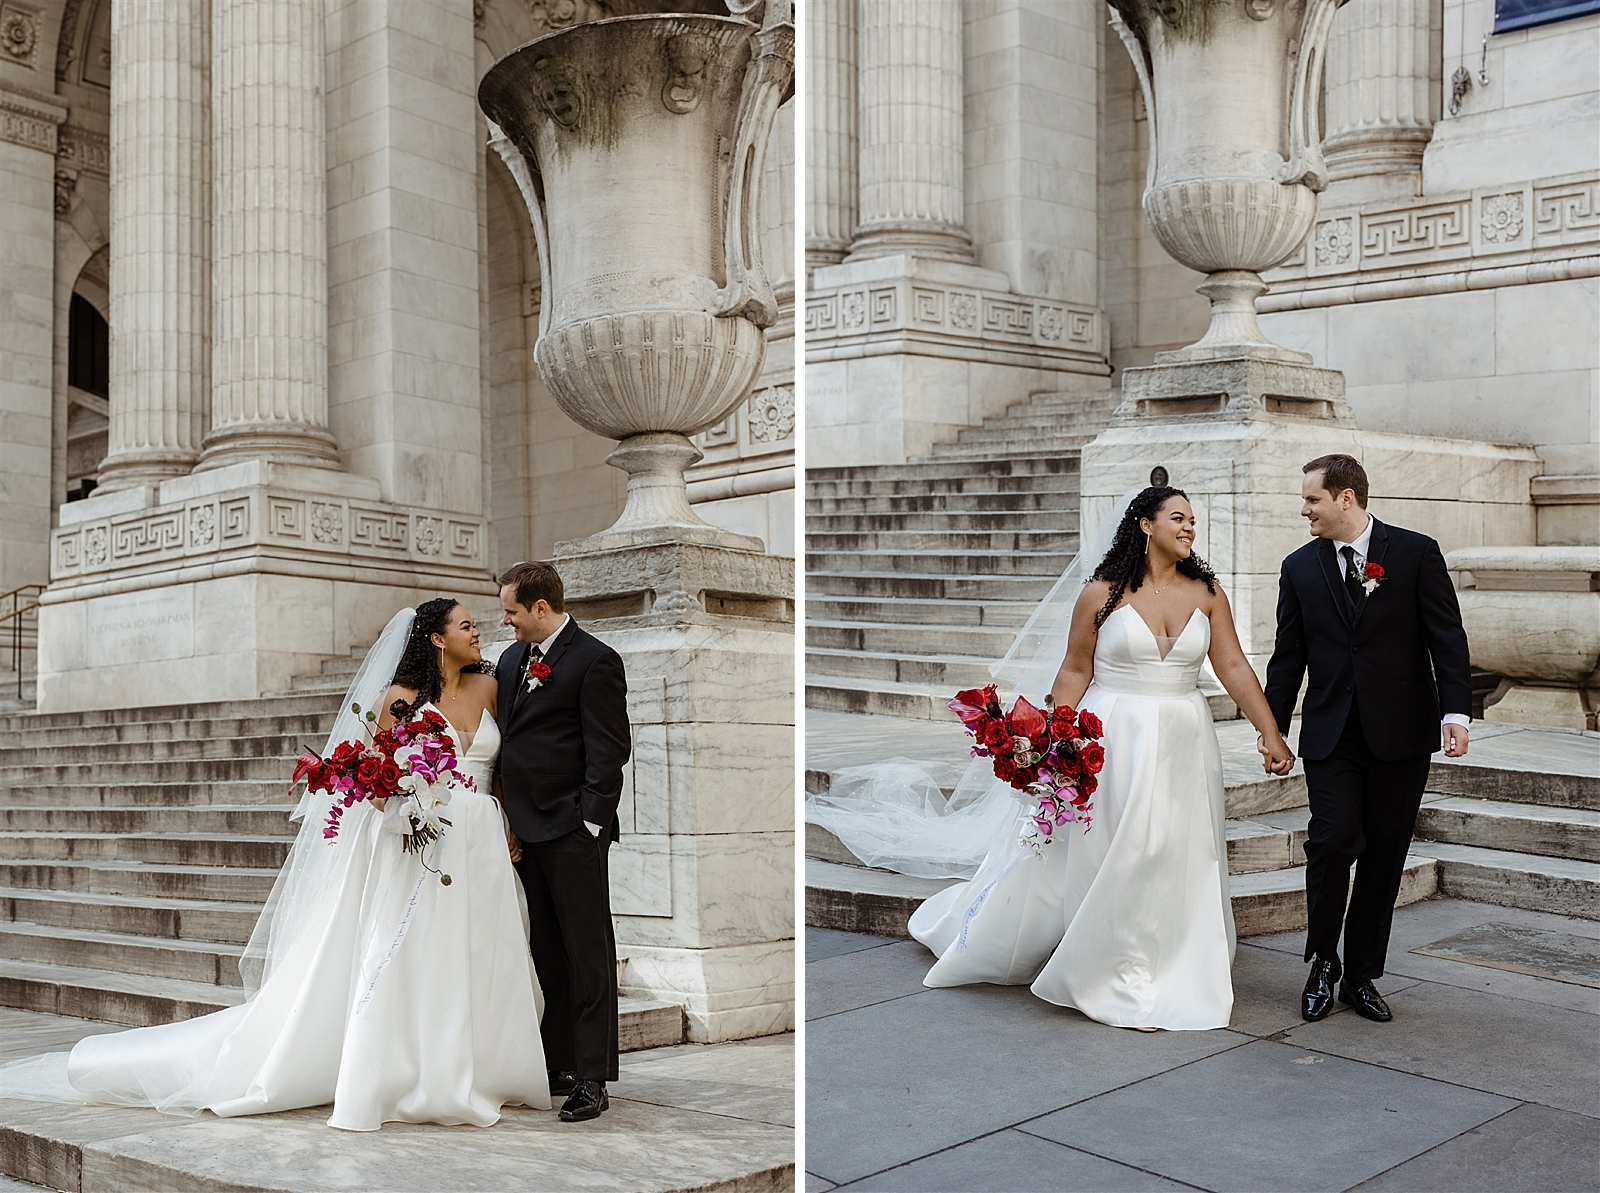 Left photo: Bride and groom smile at each other as they embrace on the steps of the New York Public Library.
Right photo: Bride and groom walk hand in hand down the steps of the New York Public Library.